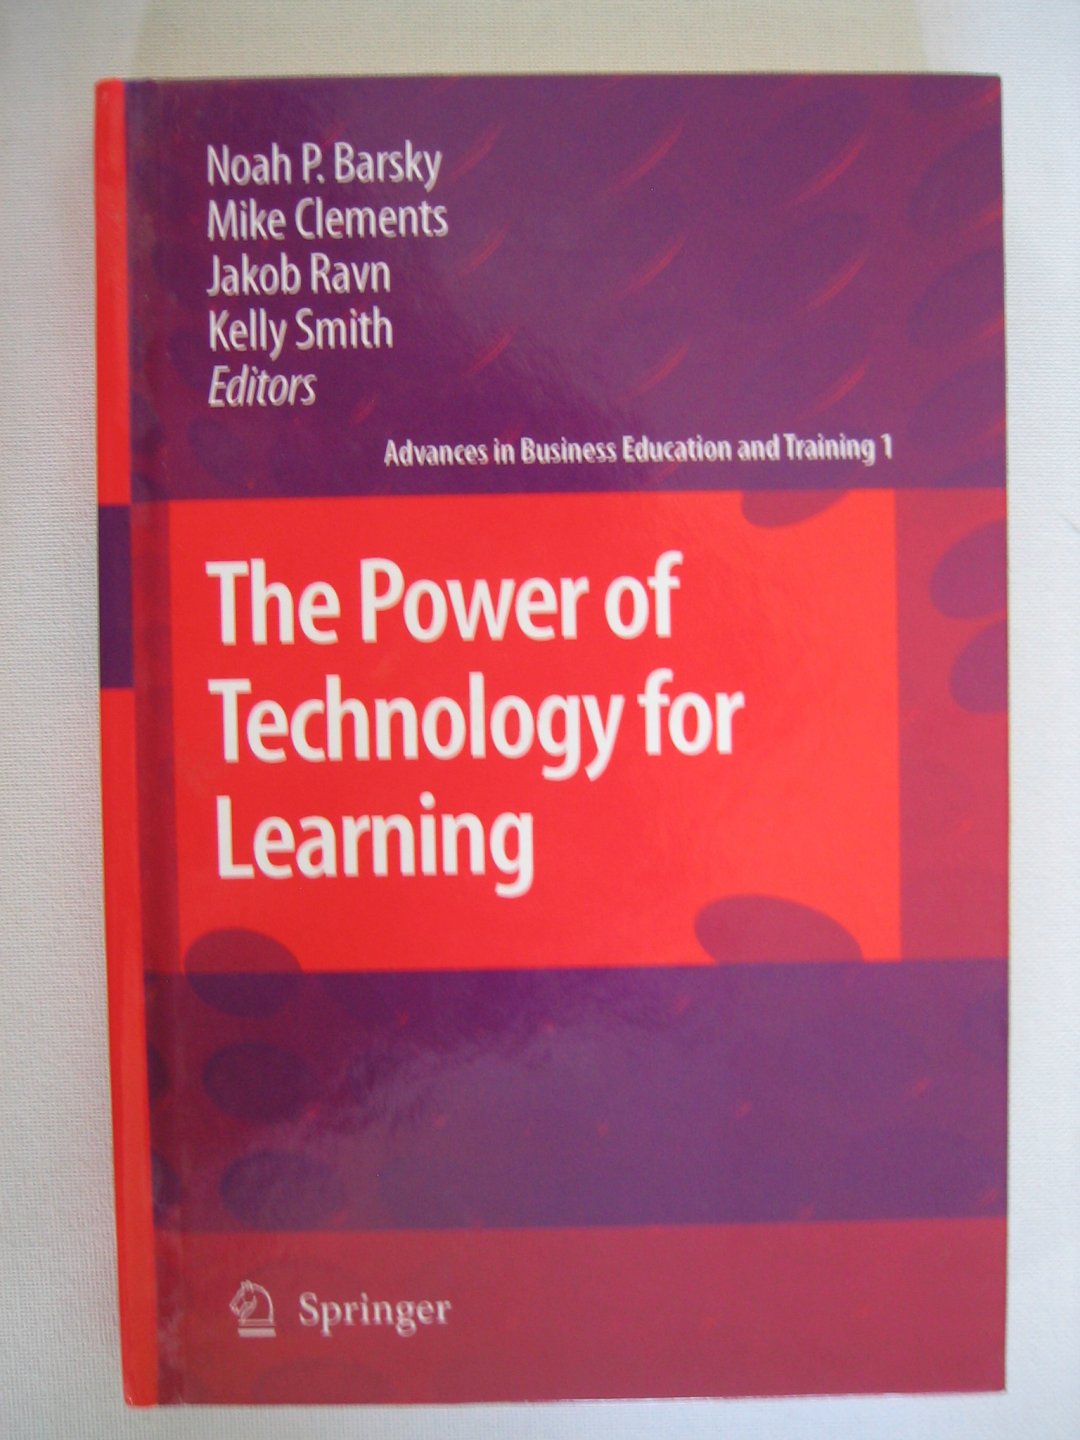 Barsky, Noah P., Mike Clements, Jakob Ravn en Kelly Smith. - The Power of Technology for Learning - Advanges in Business Education and Training 1